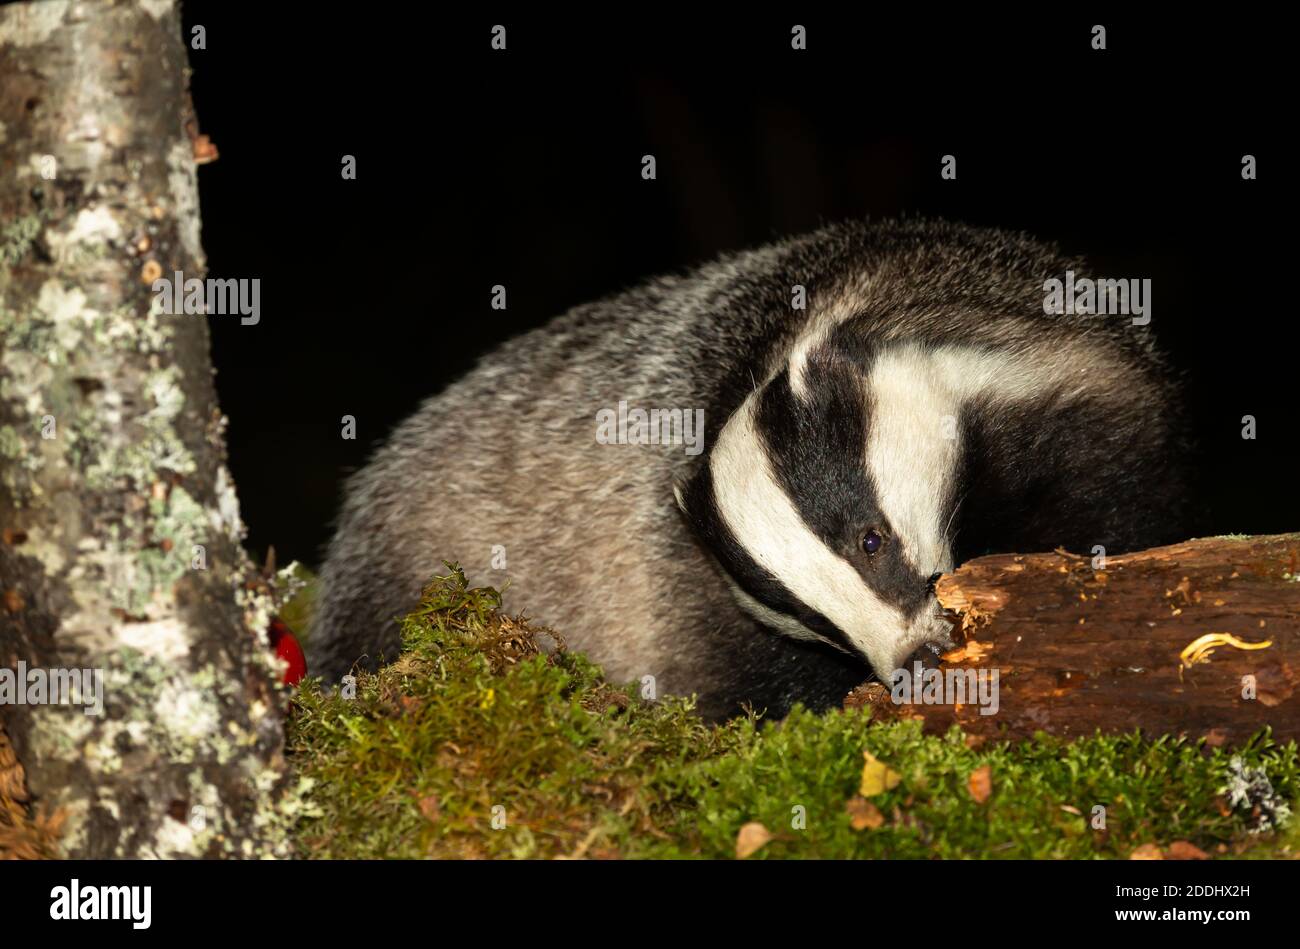 Badger, Scientific name, Meles Meles.  Wild, native badger foraging on a decaying log at night time.  Facing forward with green moss and Silver Birch Stock Photo